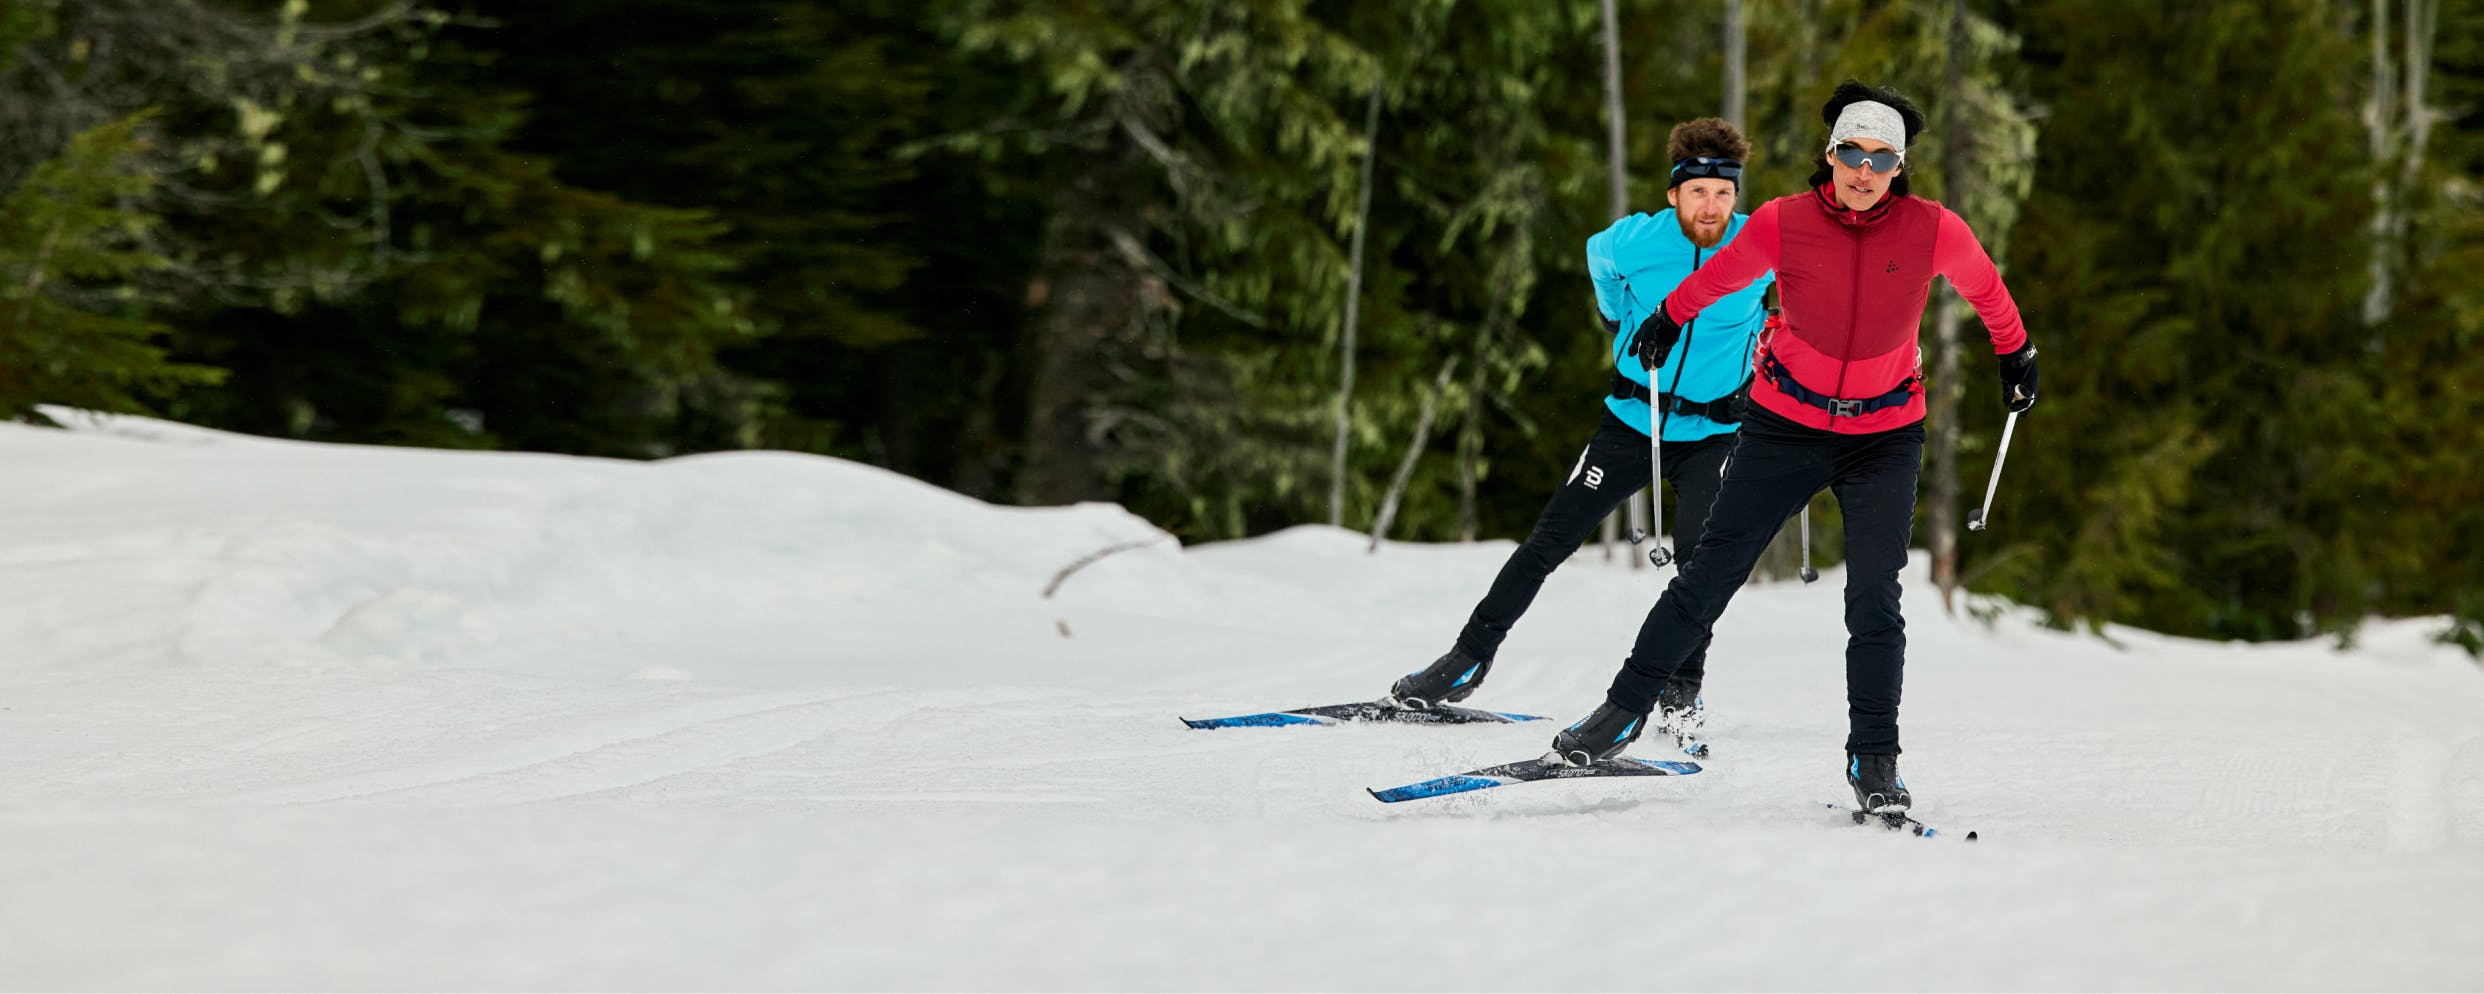 Blog - How to Select Cross Country Ski Boots